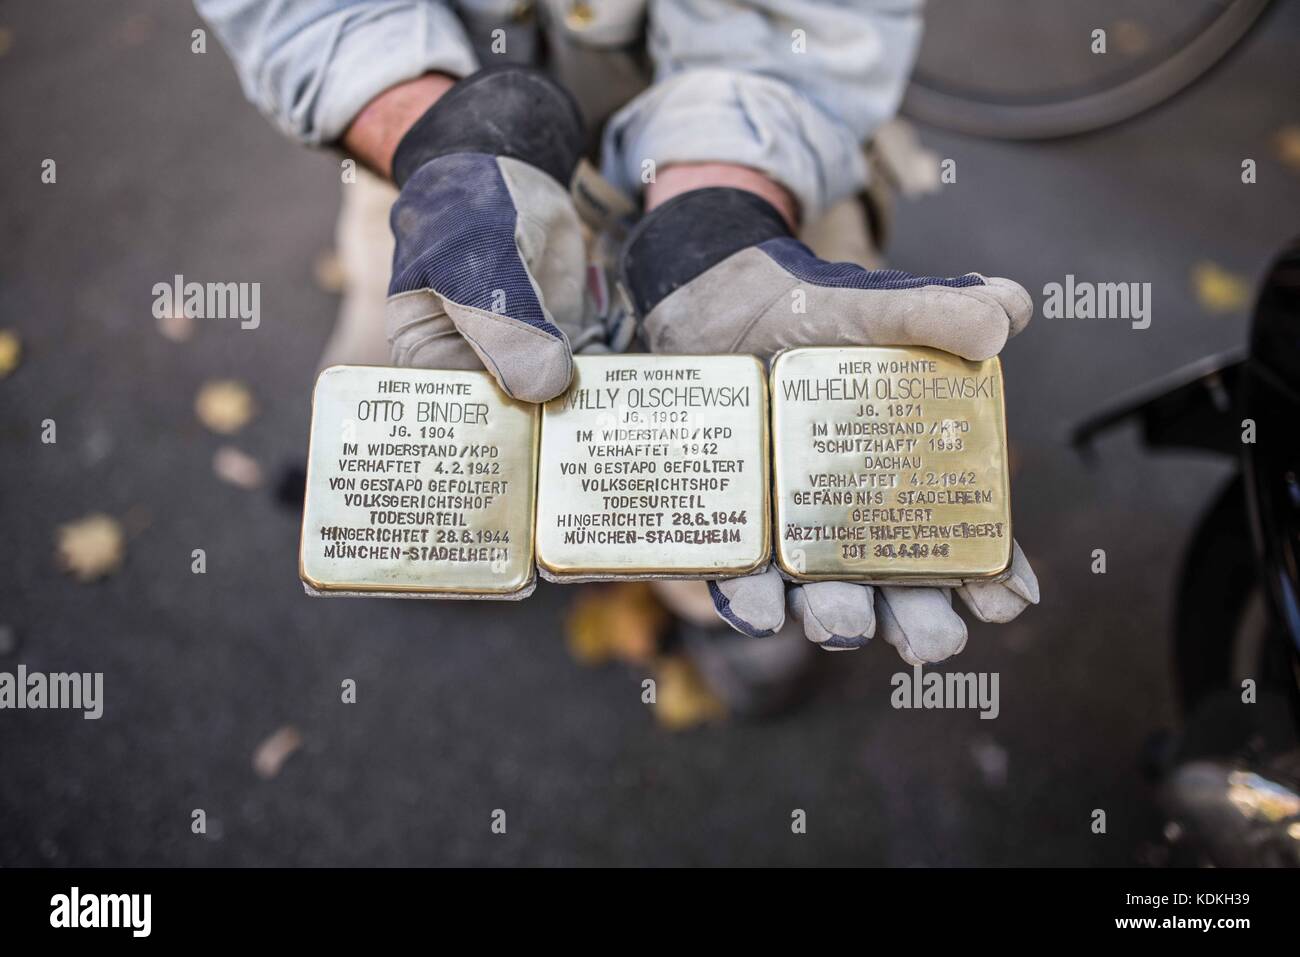 Munich, Bavaria, Germany. 14th Oct, 2017. Artist Gunter Demnig. Despite lengthy battles, the so-called Stolpersteine ('Stumbling Blocks'') containing the names & information of victims of National Socialism were installed at four different sites in Munich. The City of Munich forbid the installation of the memorial stones on public ground in 2015, which led the Stolpersteine Initiative (''˜Stumbling Block Initiative'') to seek private properties to install them. To date, 61,000 Stolpersteine in 2,000 cities in 21 countries have been dedicated, with much criticism lobbed against Munich Stock Photo